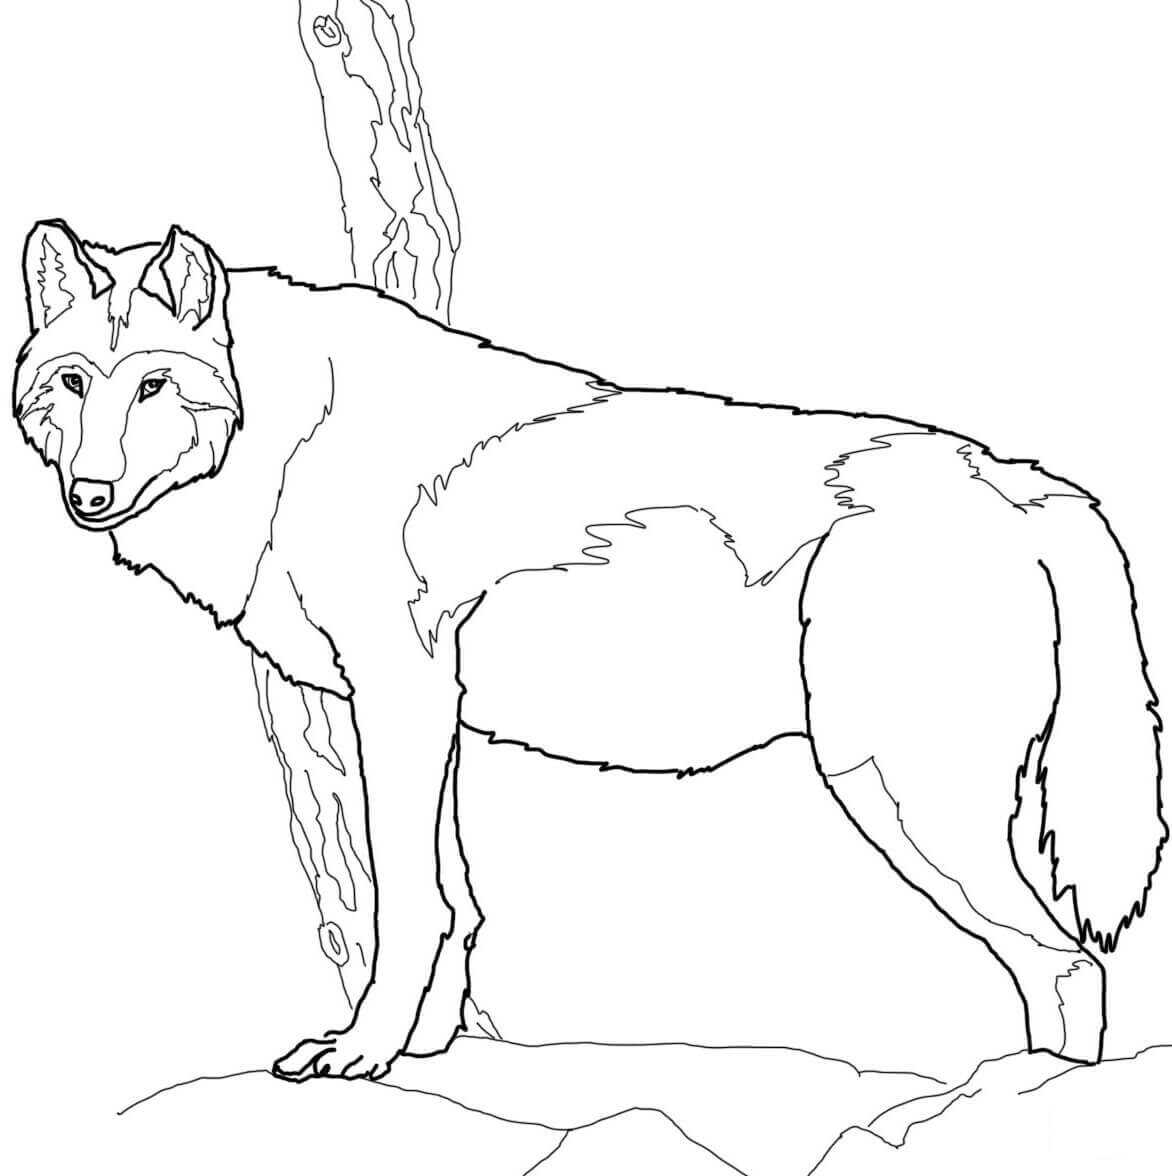 Canadian Timber Wolf Has Short Ears And Bushy Fur Coloring Pages